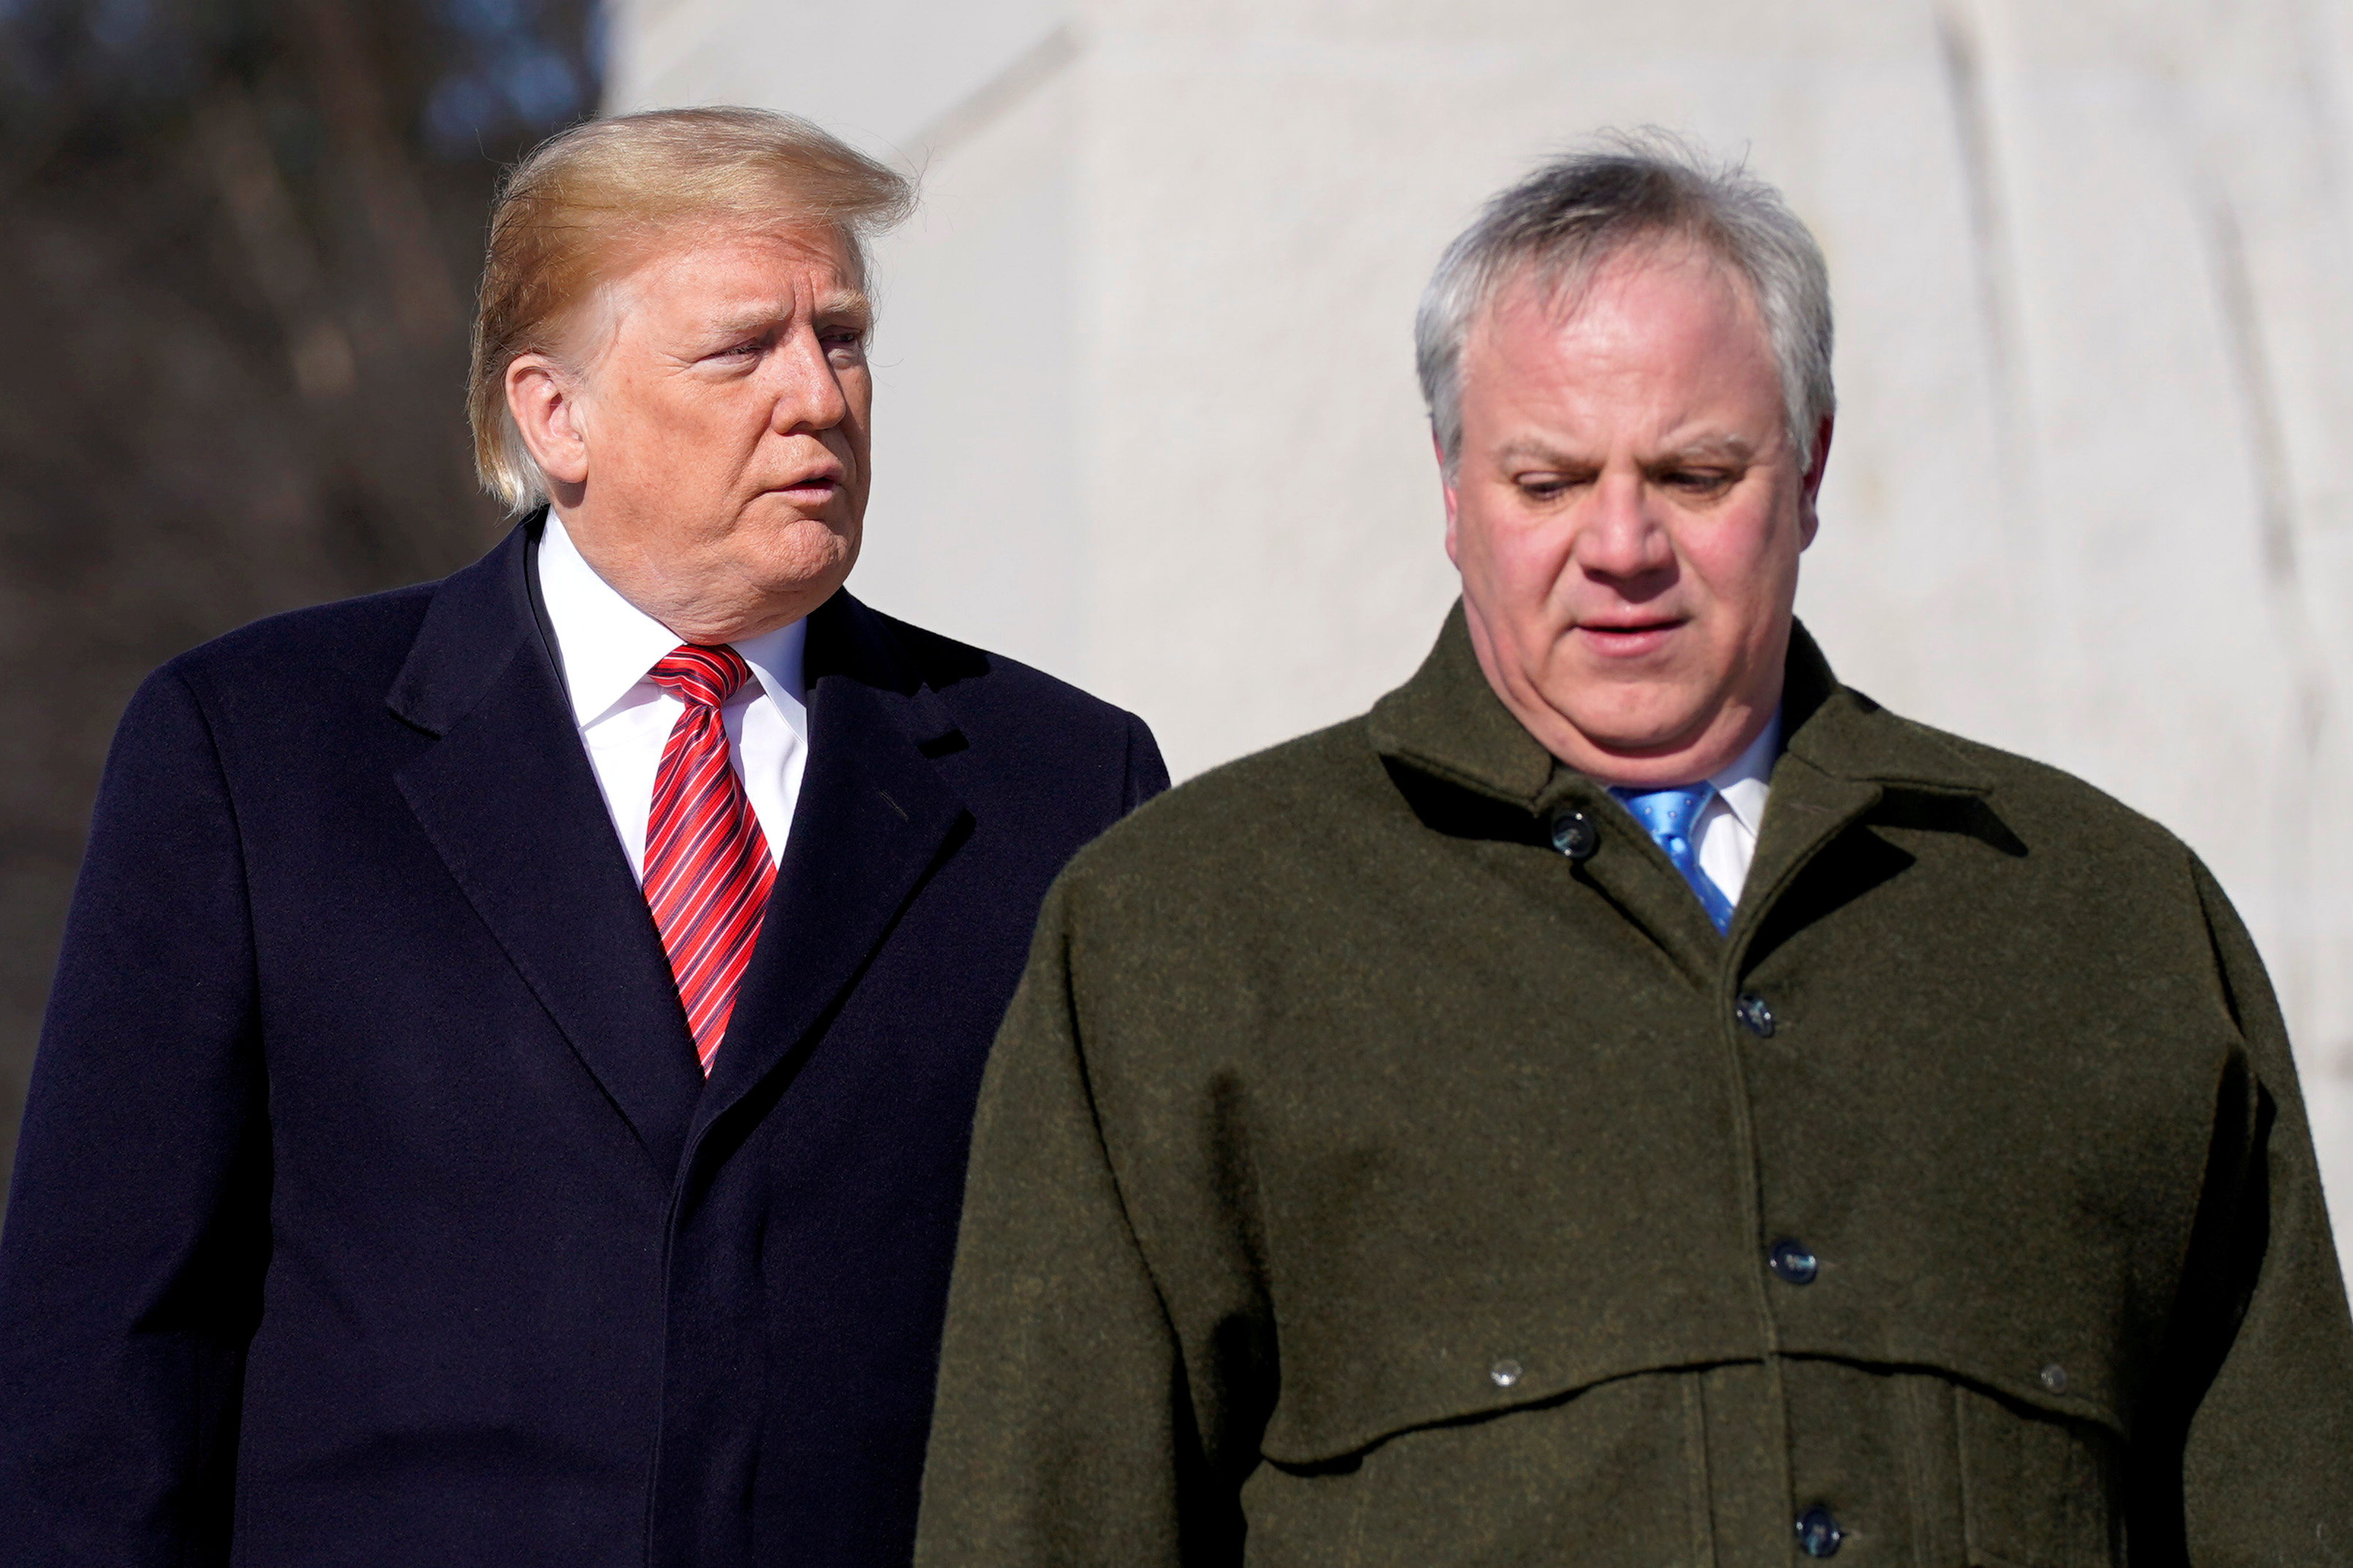 U.S. President Donald Trump and acting U.S. Secretary of Interior David Bernhardt arrive to place a wreath at the Martin Luther King Memorial in Washington